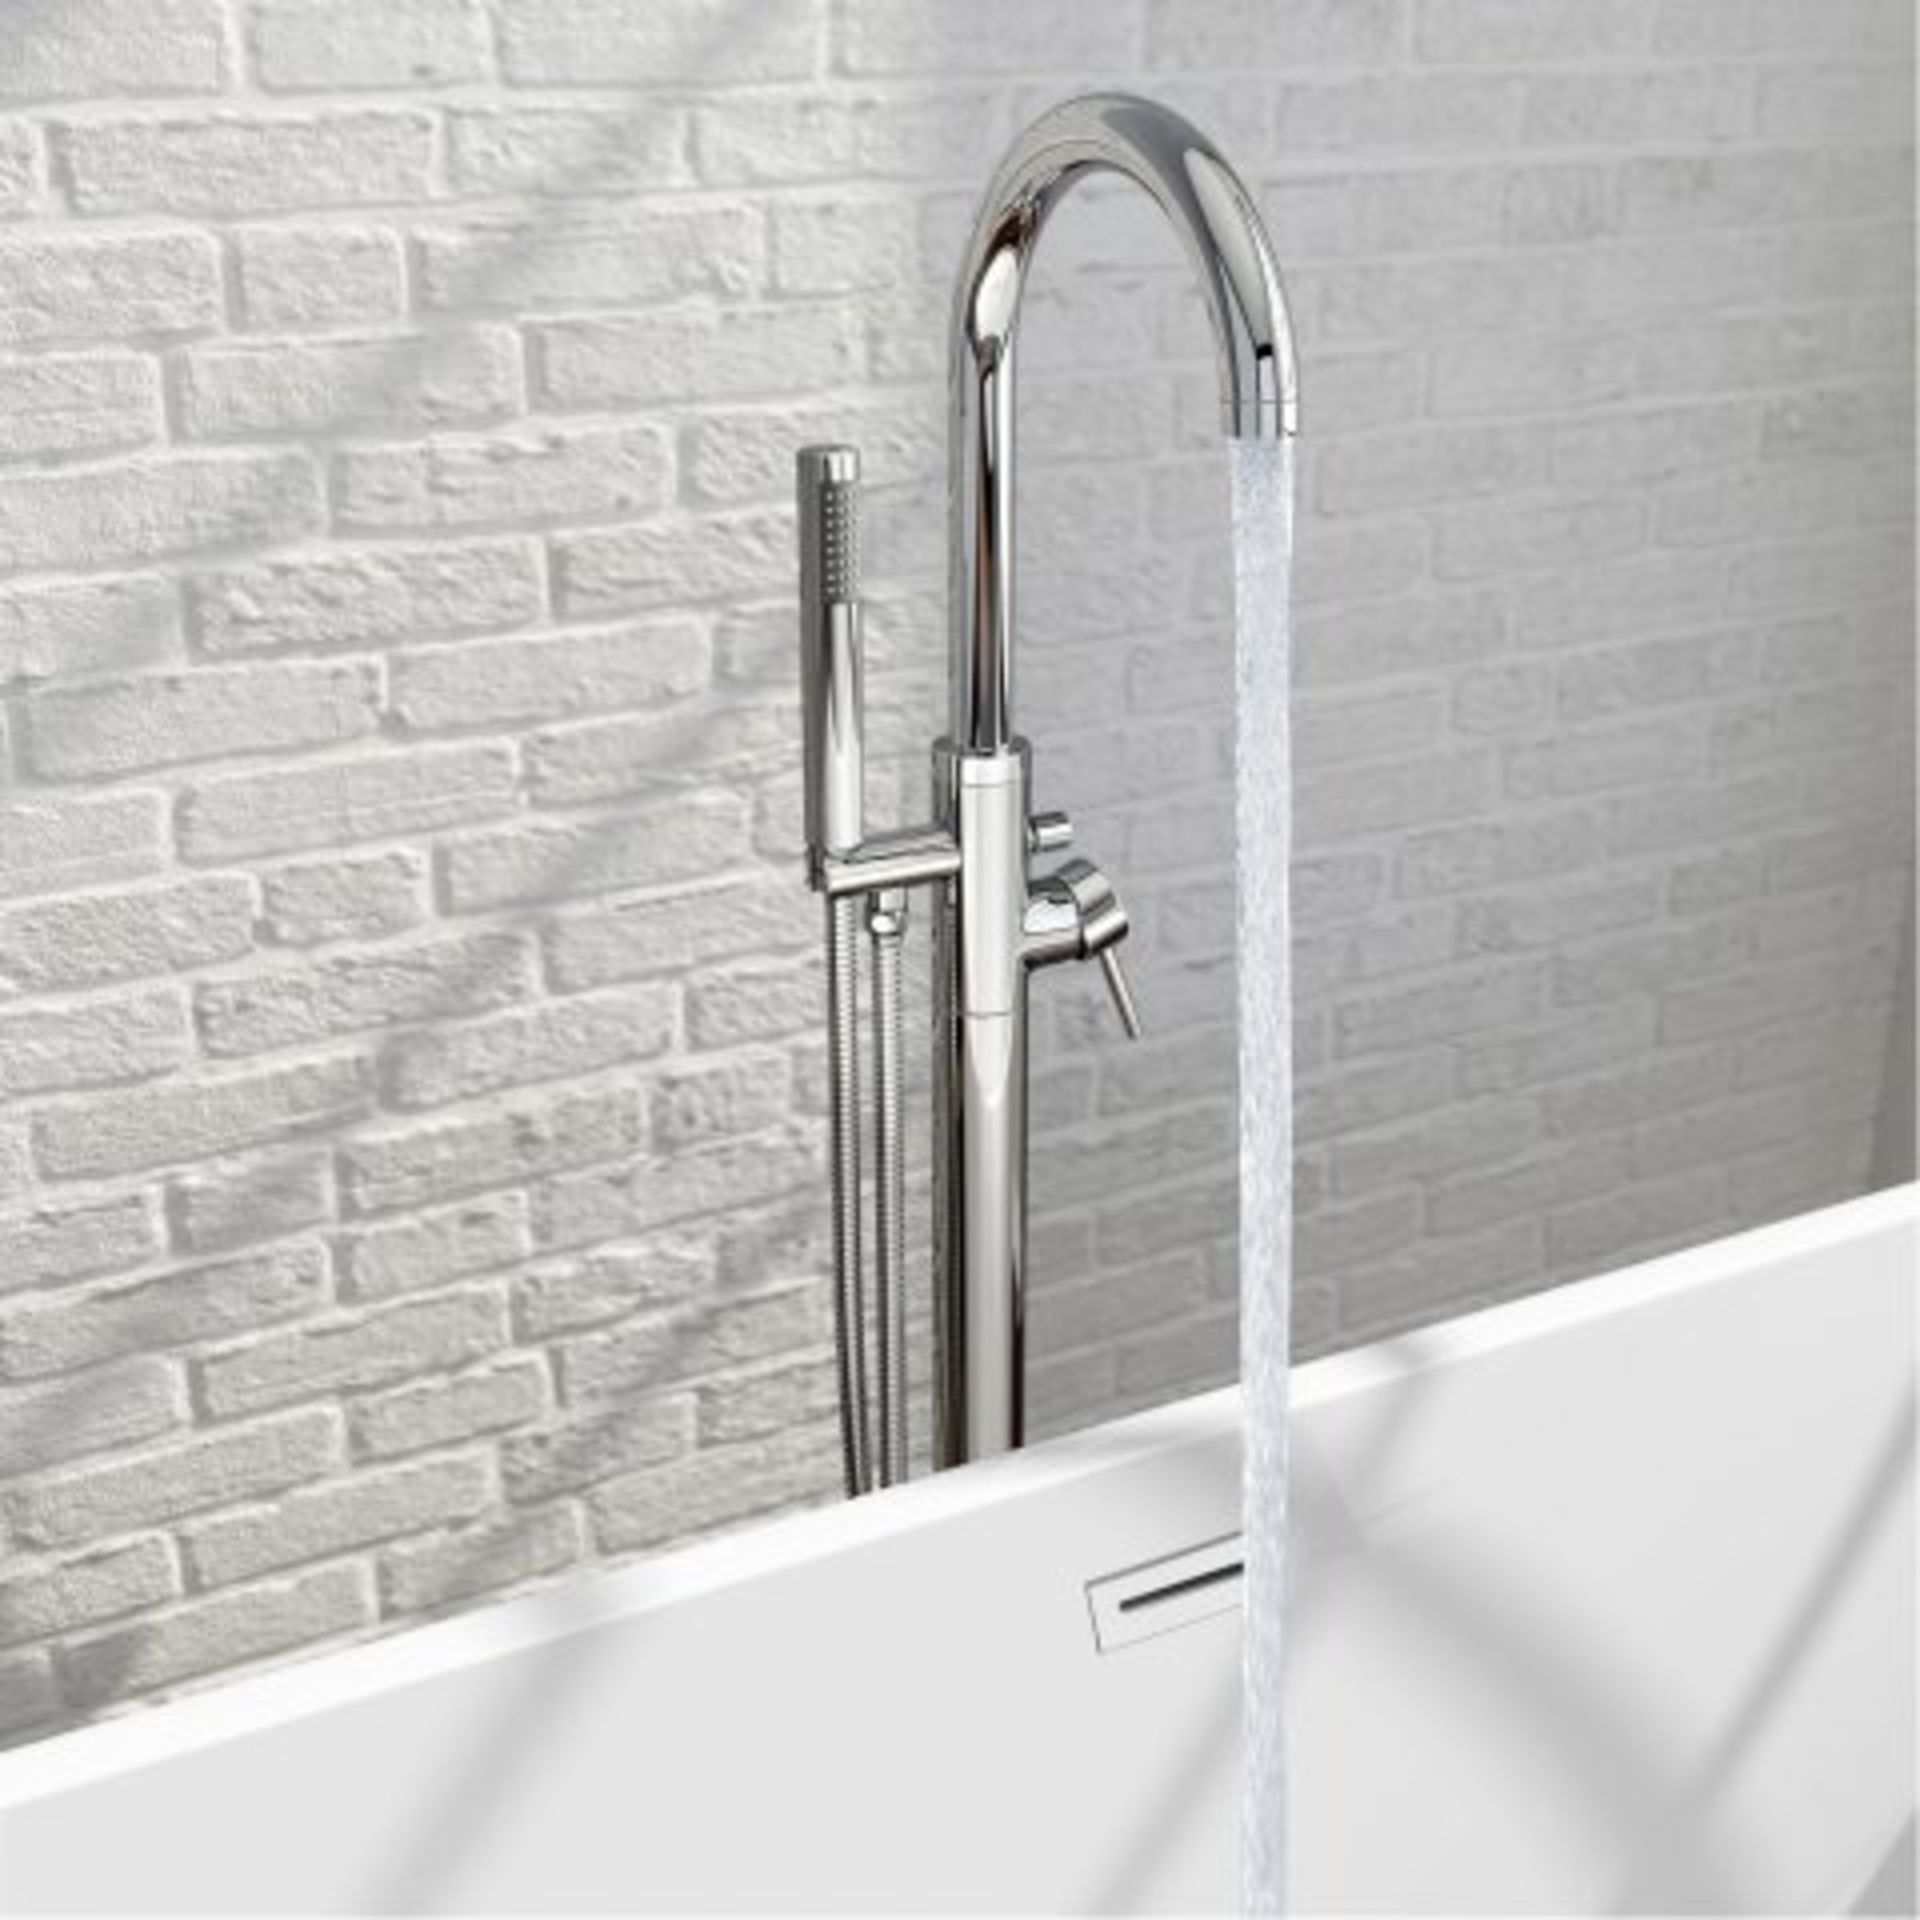 (A3) Gladstone II Freestanding Bath Mixer Tap with Hand Held Shower Head Simplicity at its best: Our - Image 2 of 5